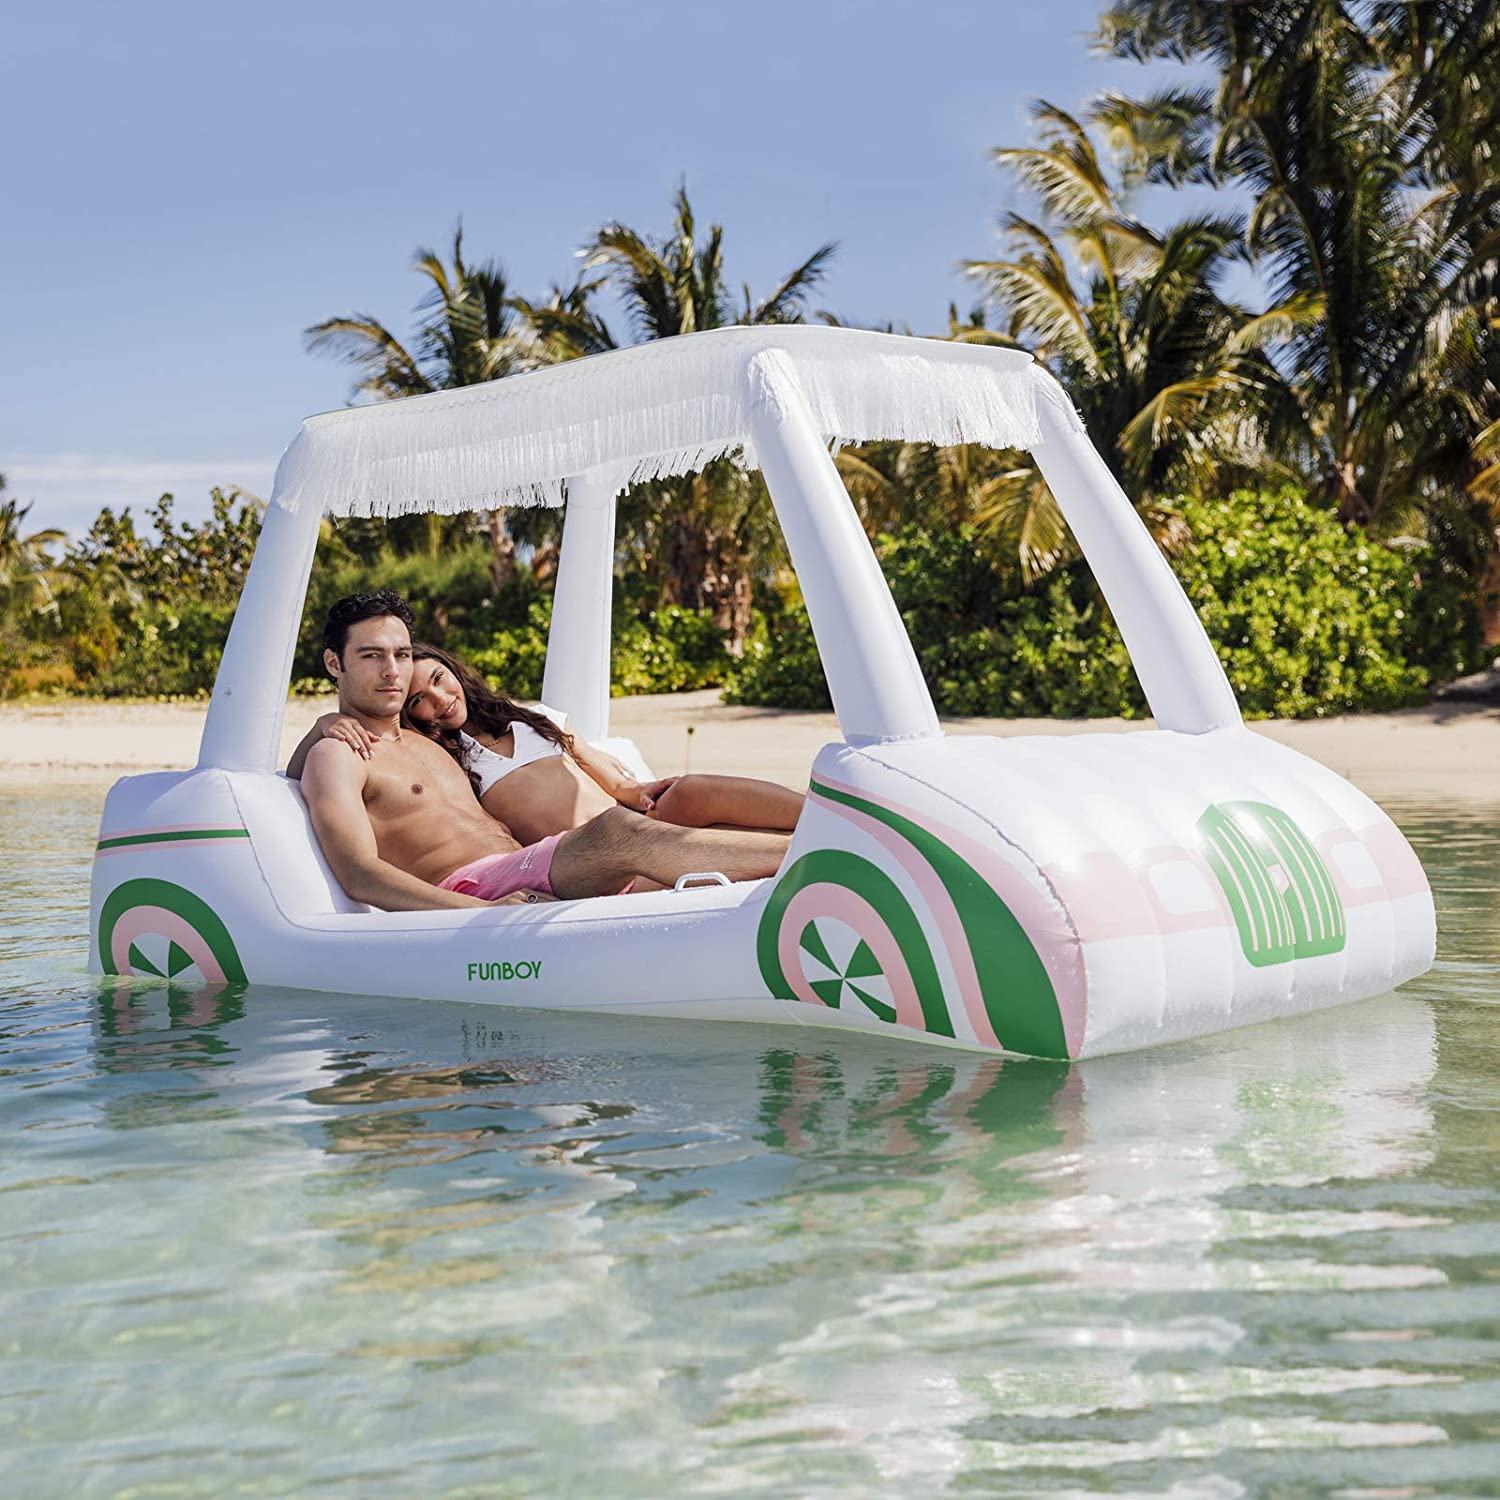 FUNBOY Giant Inflatable Luxury Golf Cart Pool Float